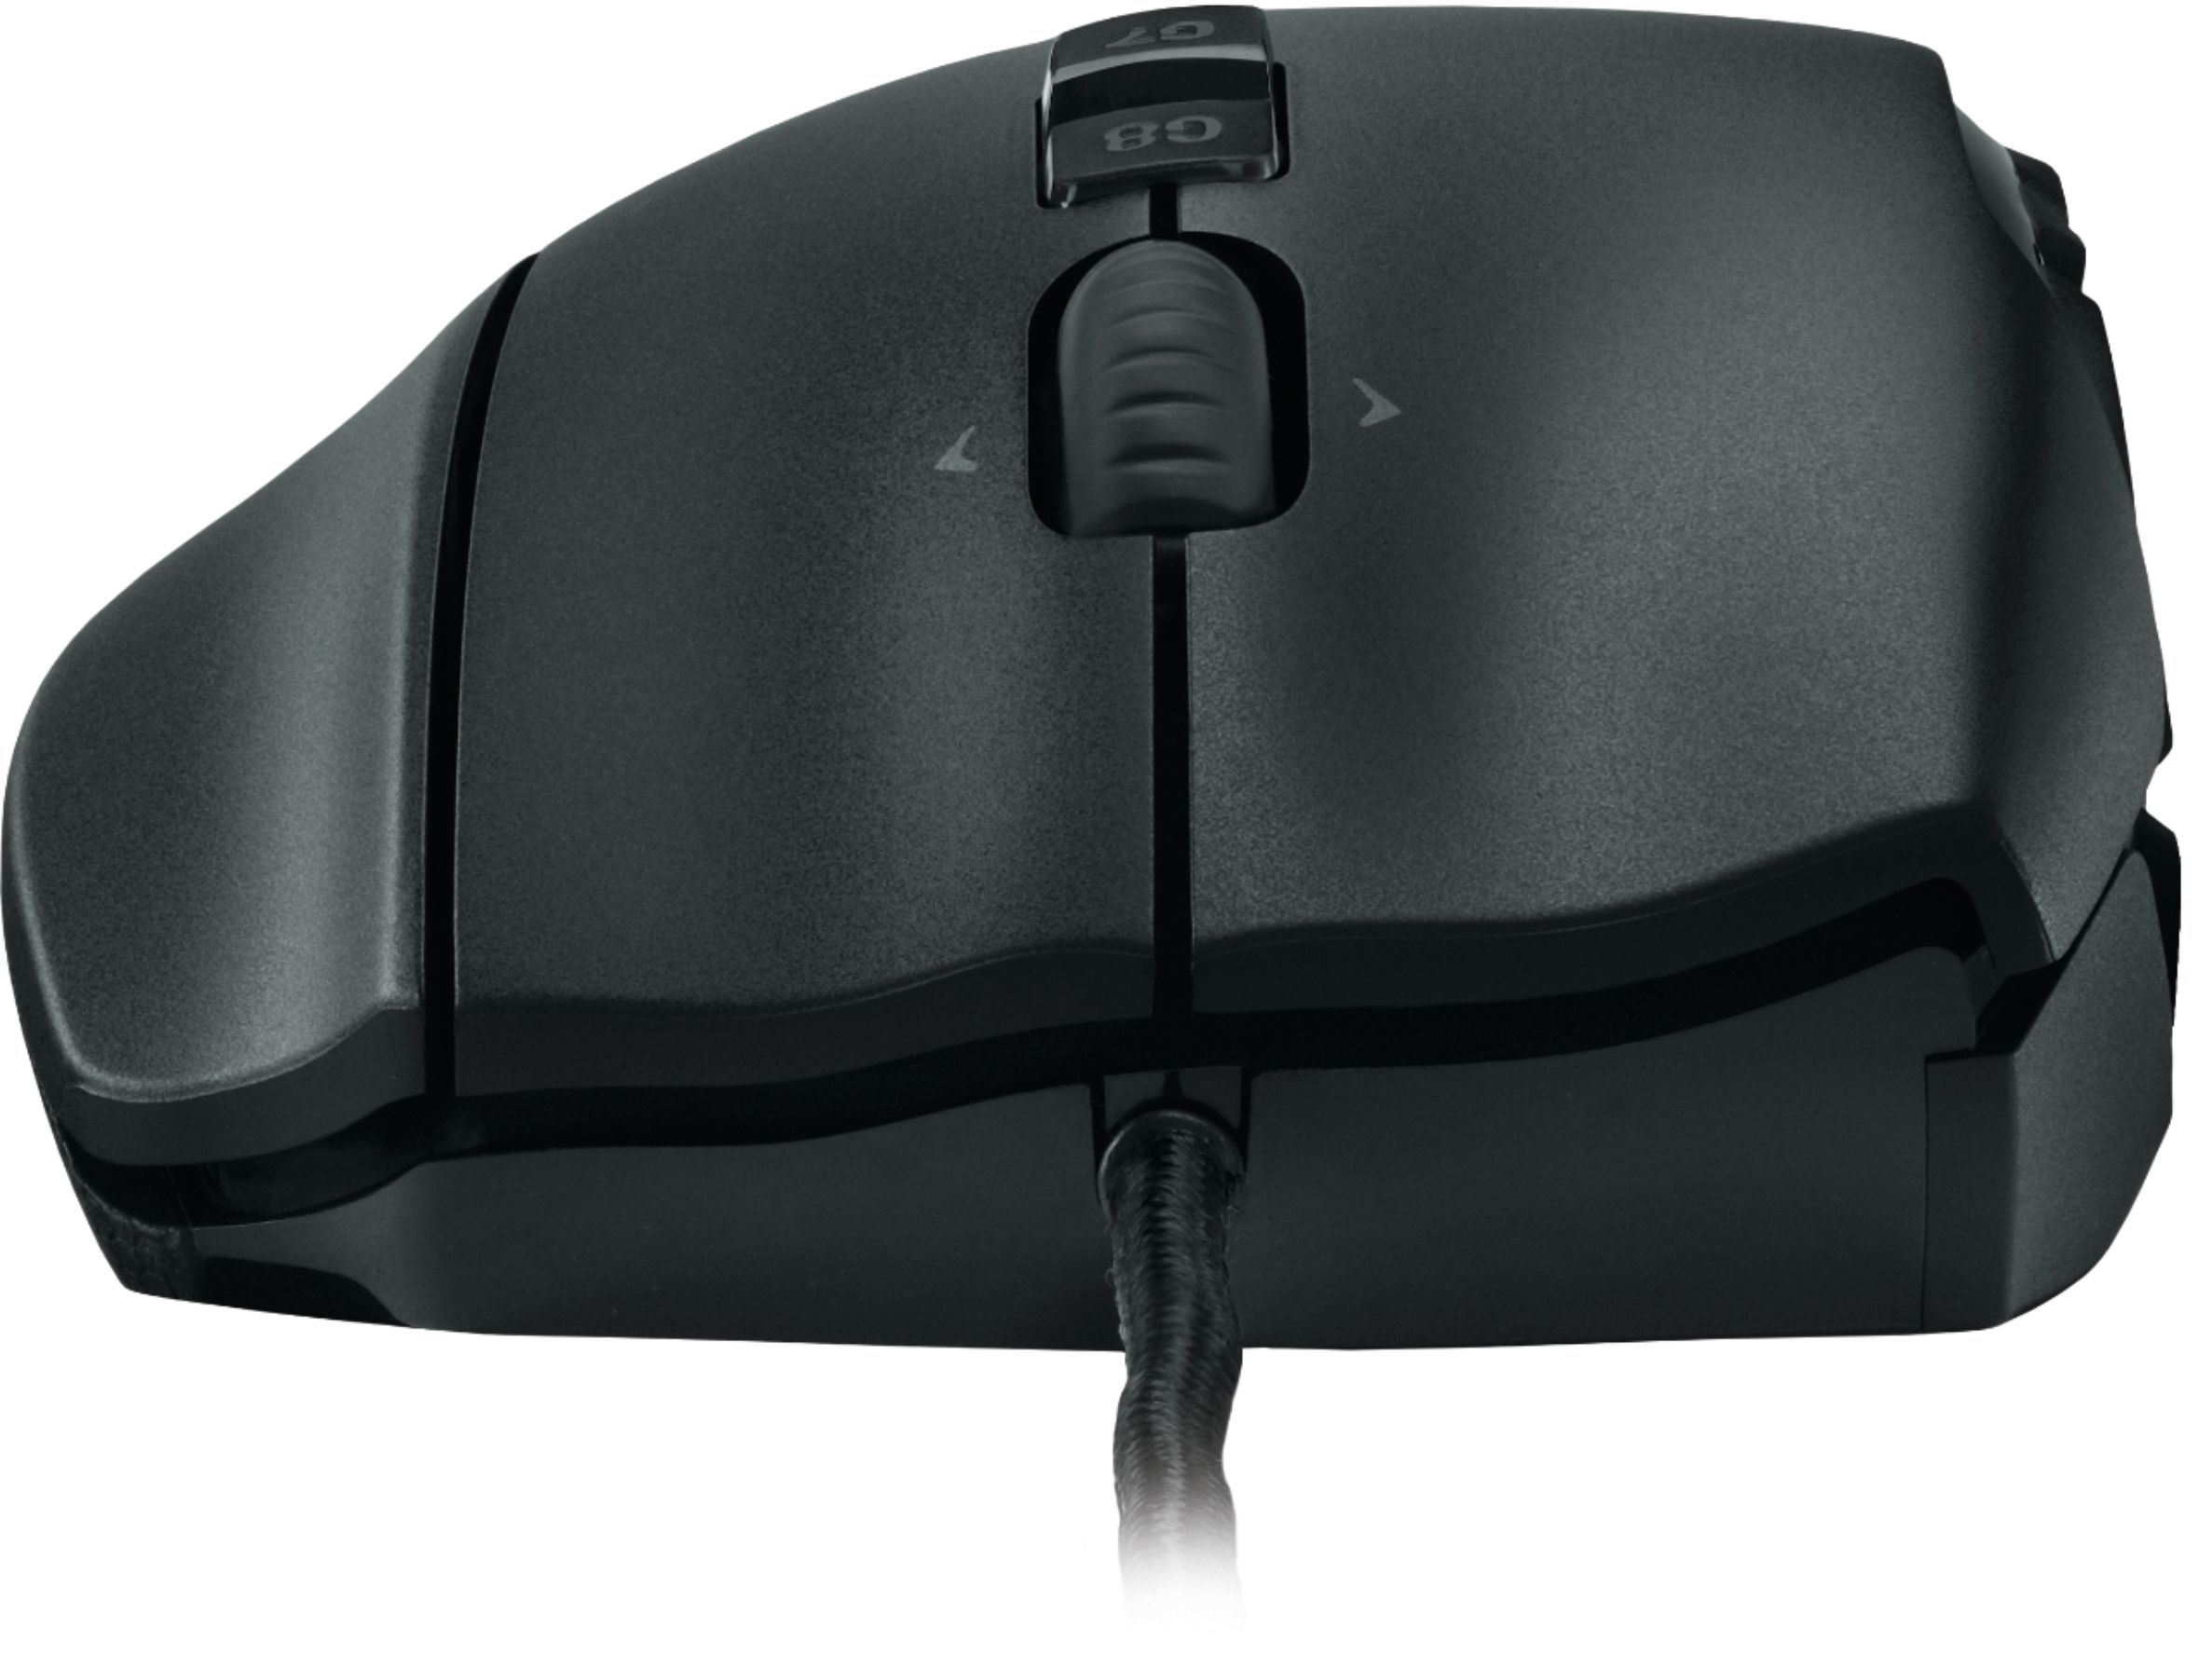 PC/タブレット PC周辺機器 Logitech G600 MMO Wired Optical Gaming Mouse Black 910-002864 